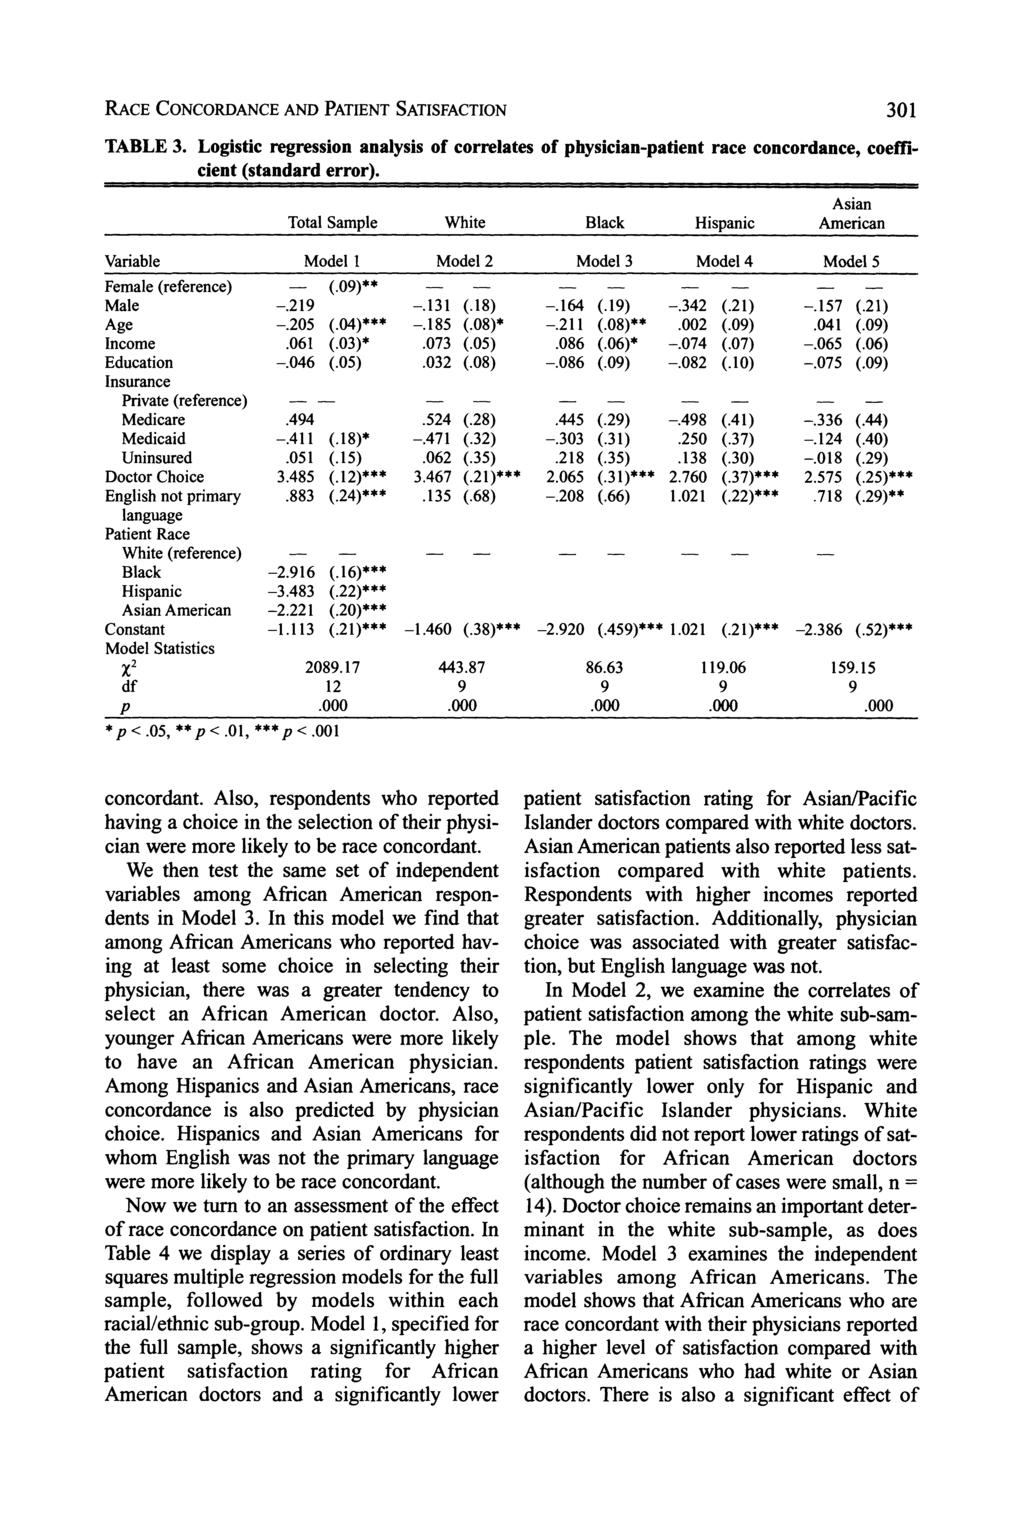 RACE CONCORDANCE AND PATIENT SATISFACTION 301 TABLE 3. Logistic regression analysis of correlates of physician-patient race concordance, coefficient (standard error).